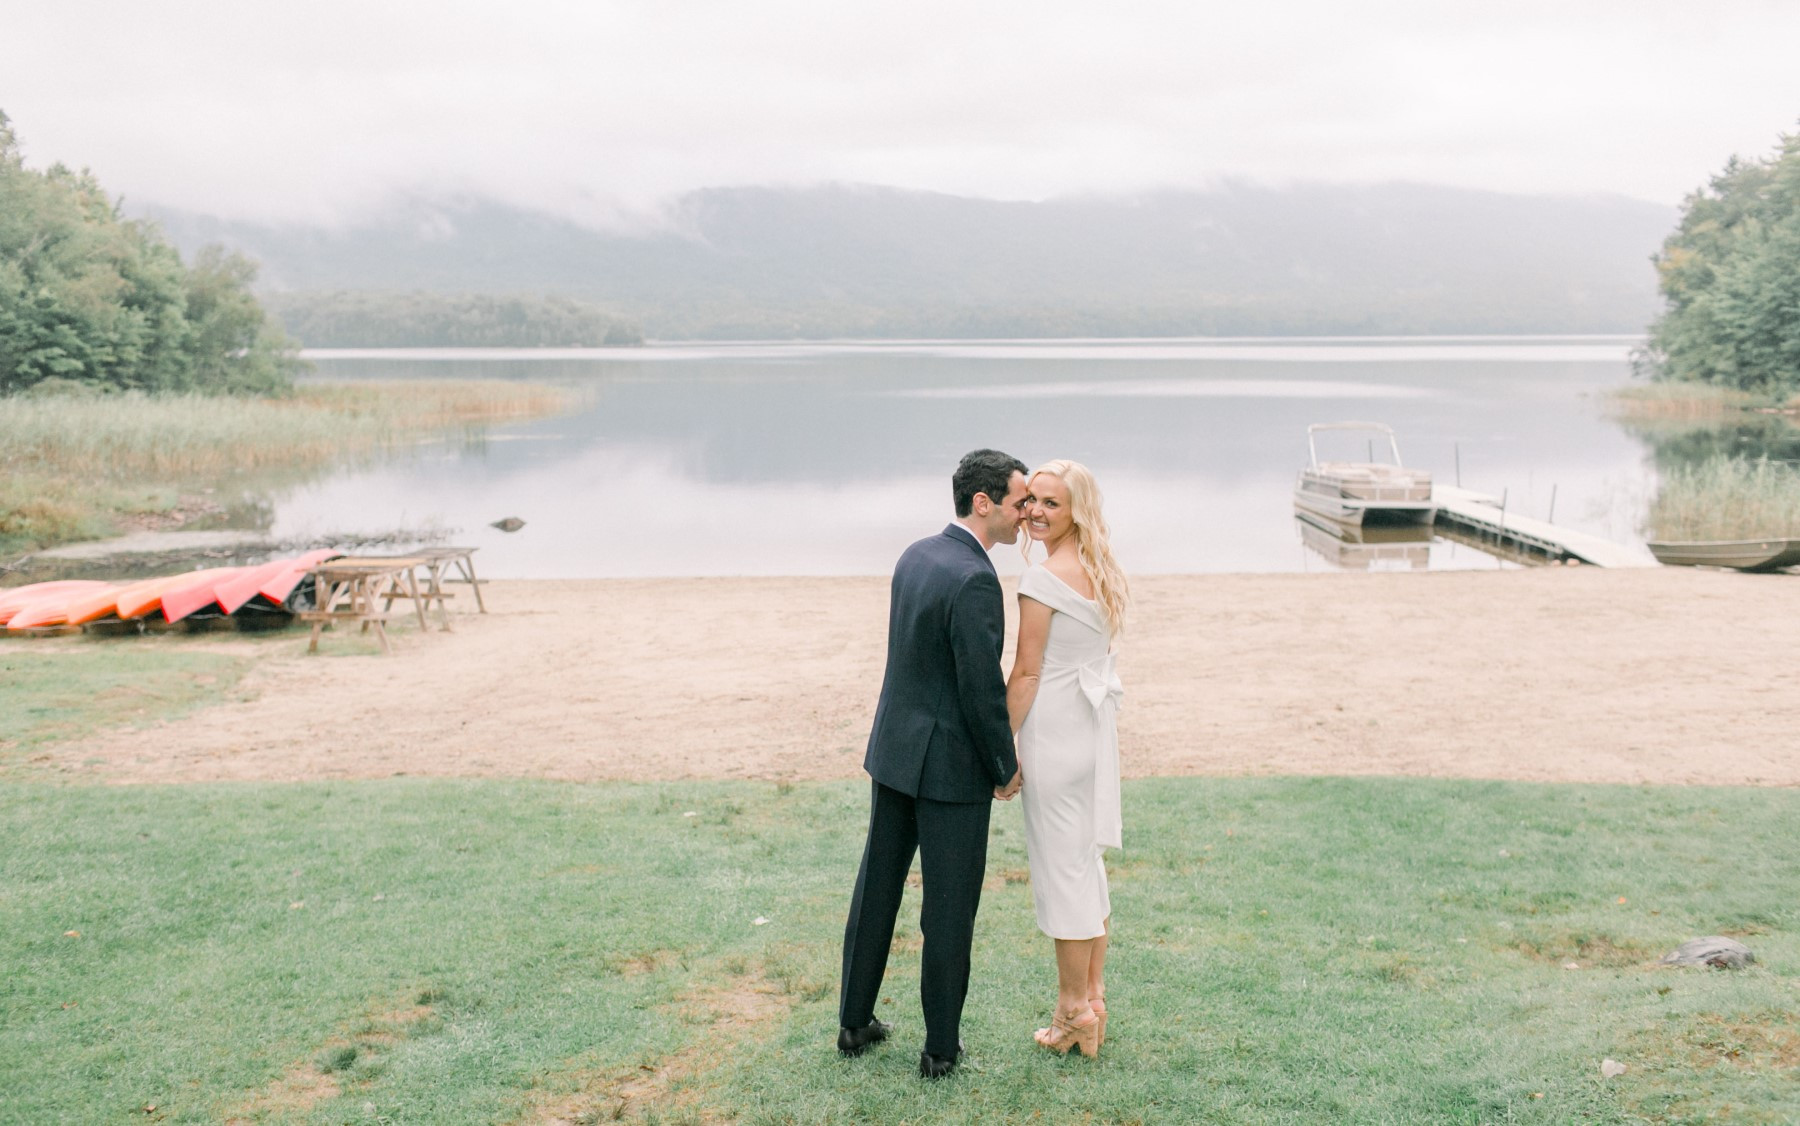 bride and groom on grass before beach, overlooking kayaks, lake, and pontoon boat